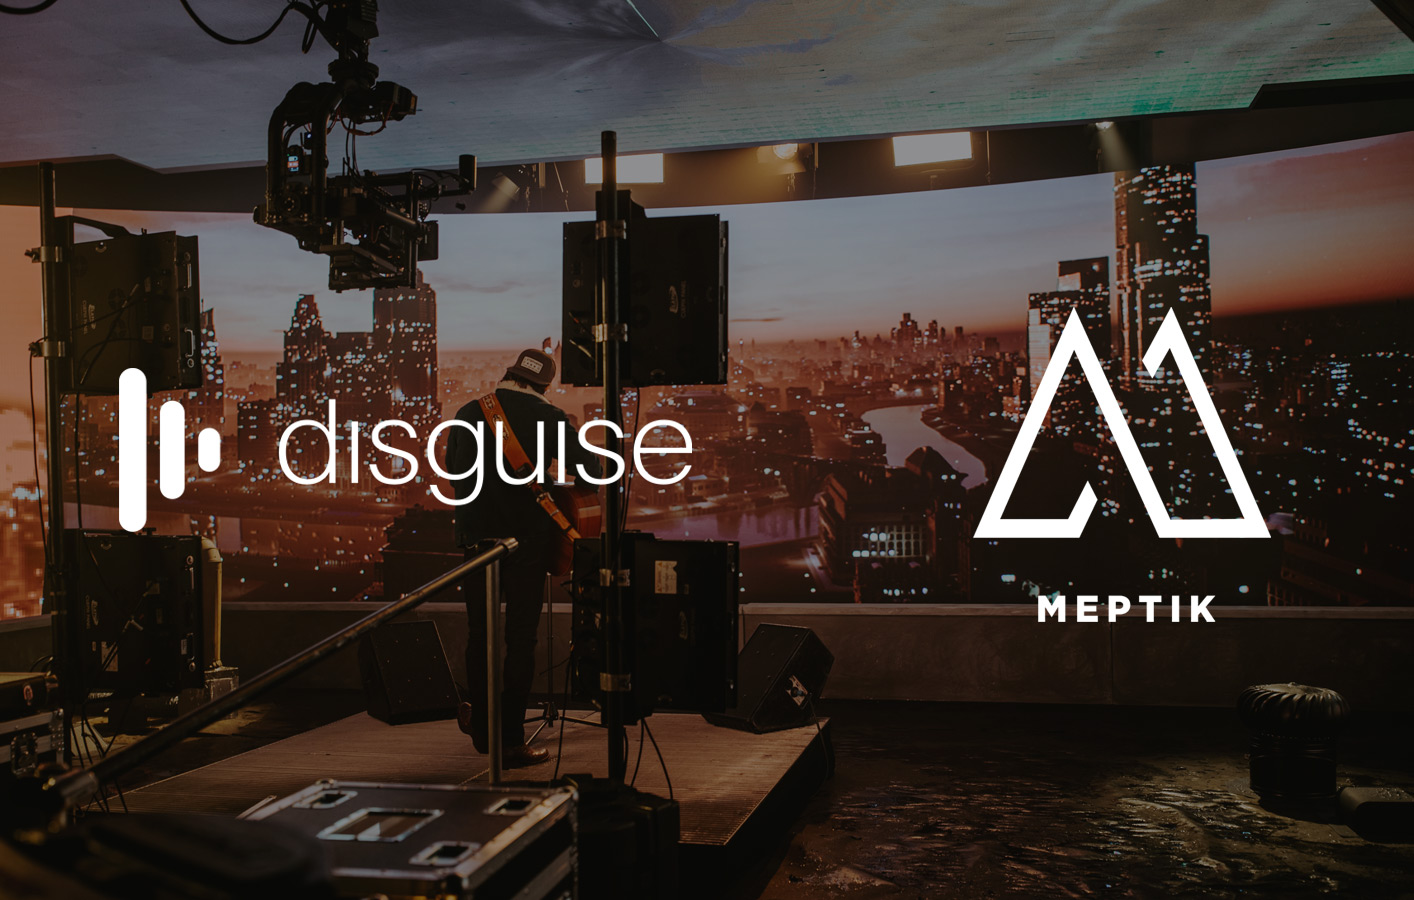 disguise acquires creative studio Meptik to accelerate global delivery of world-class immersive productions